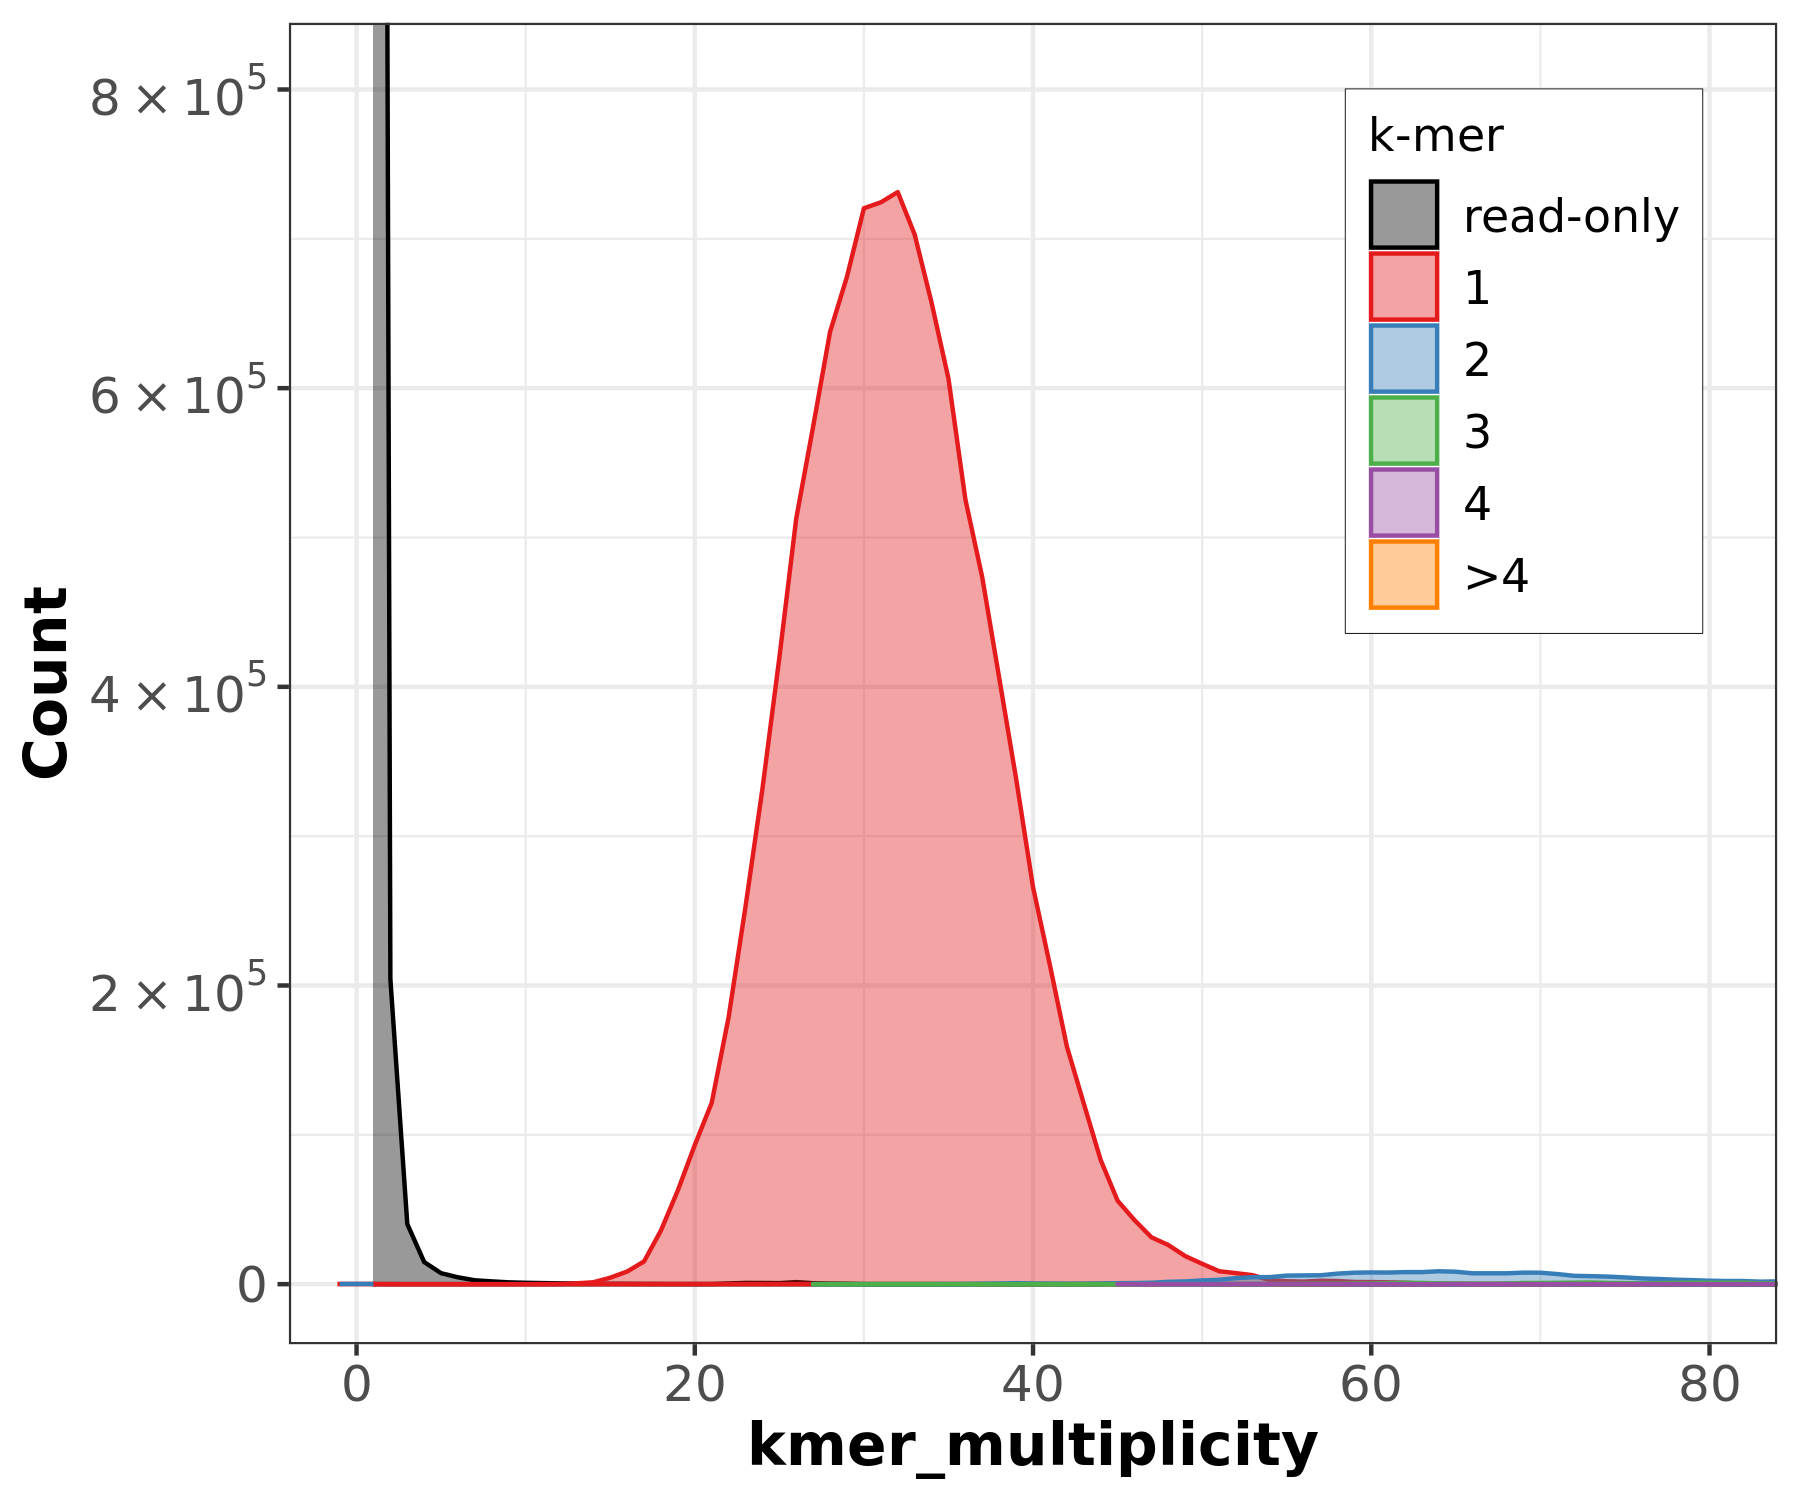 Merqury spectra-cn plot for S.cerevesiae S288C assembly